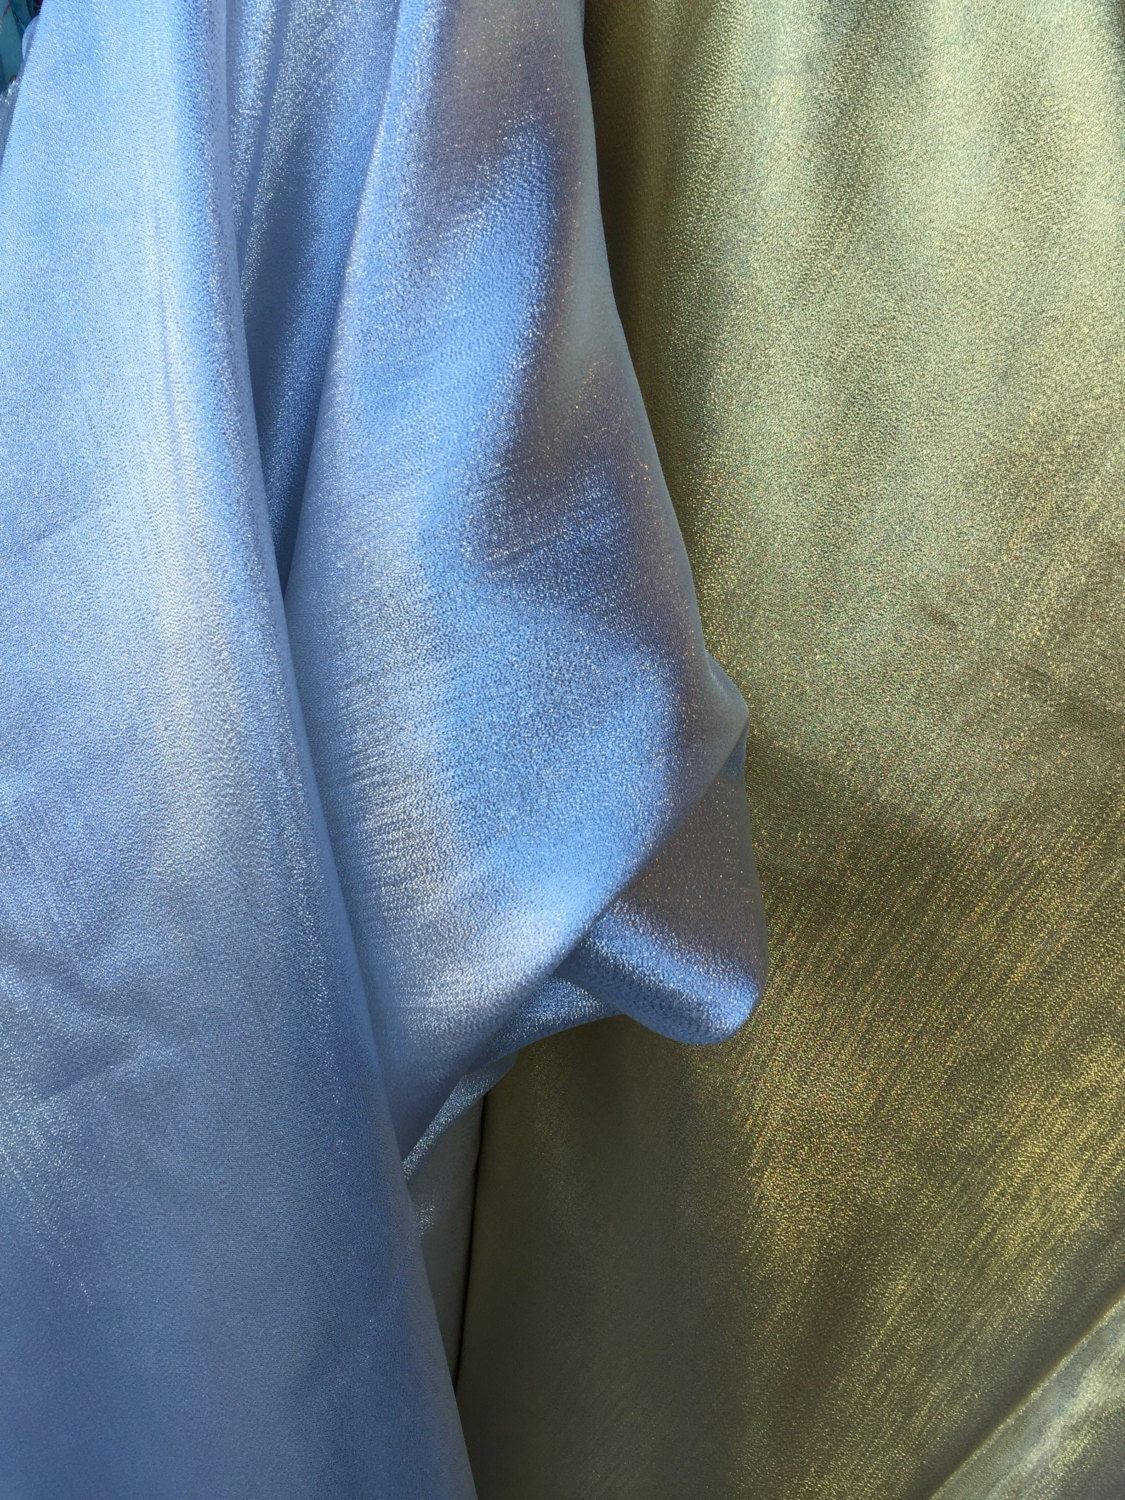 Silver Metalic Silk Lame Fabric Sold by the Yard Wedding Prom Draping Decoration Tablecloths Party